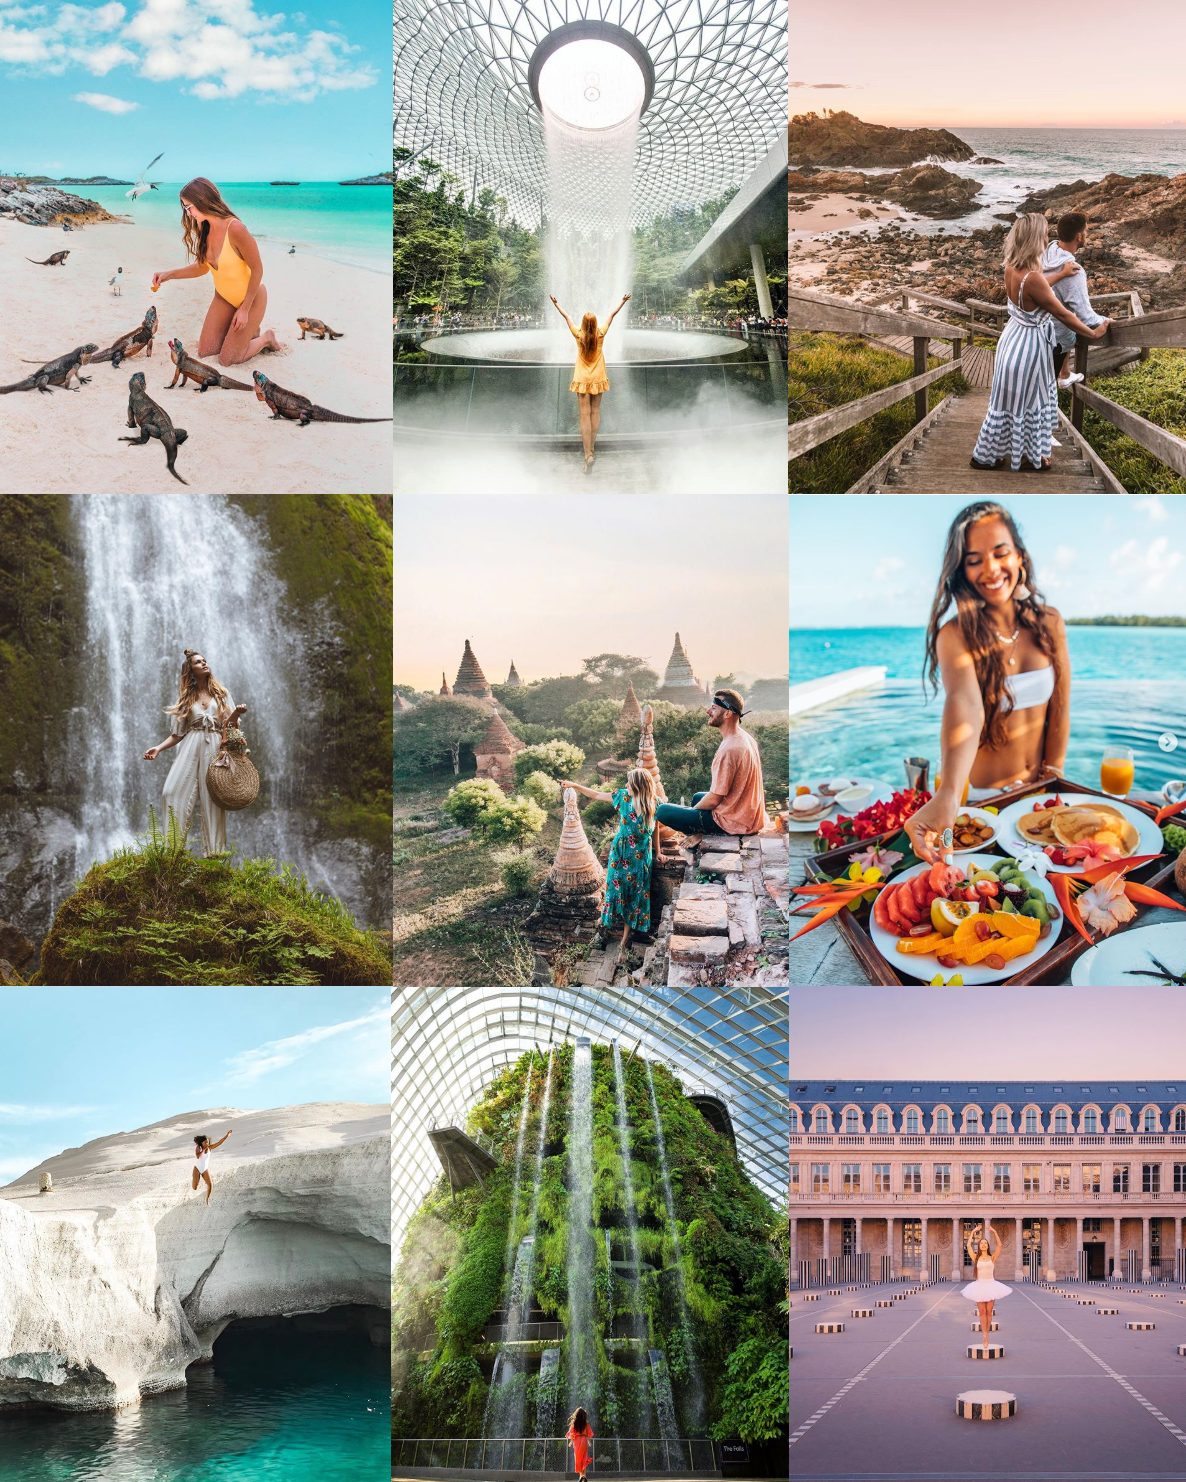 100 Best Travel Influencers With Under 100k Followers to Watch in 2019